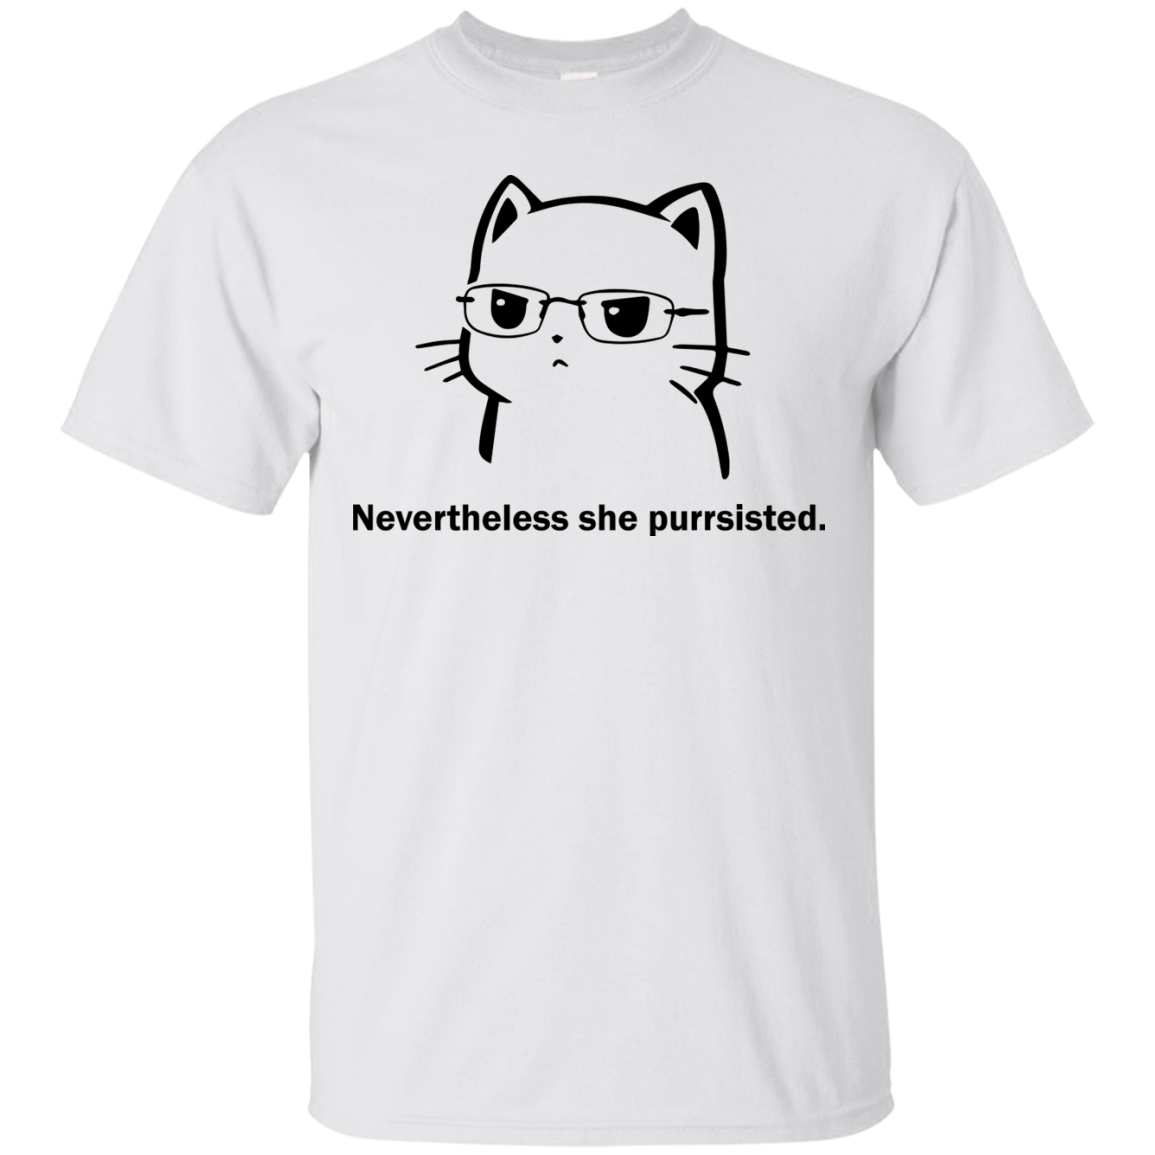 Funny Cat Nevertheless she purrsisted shirt, tank